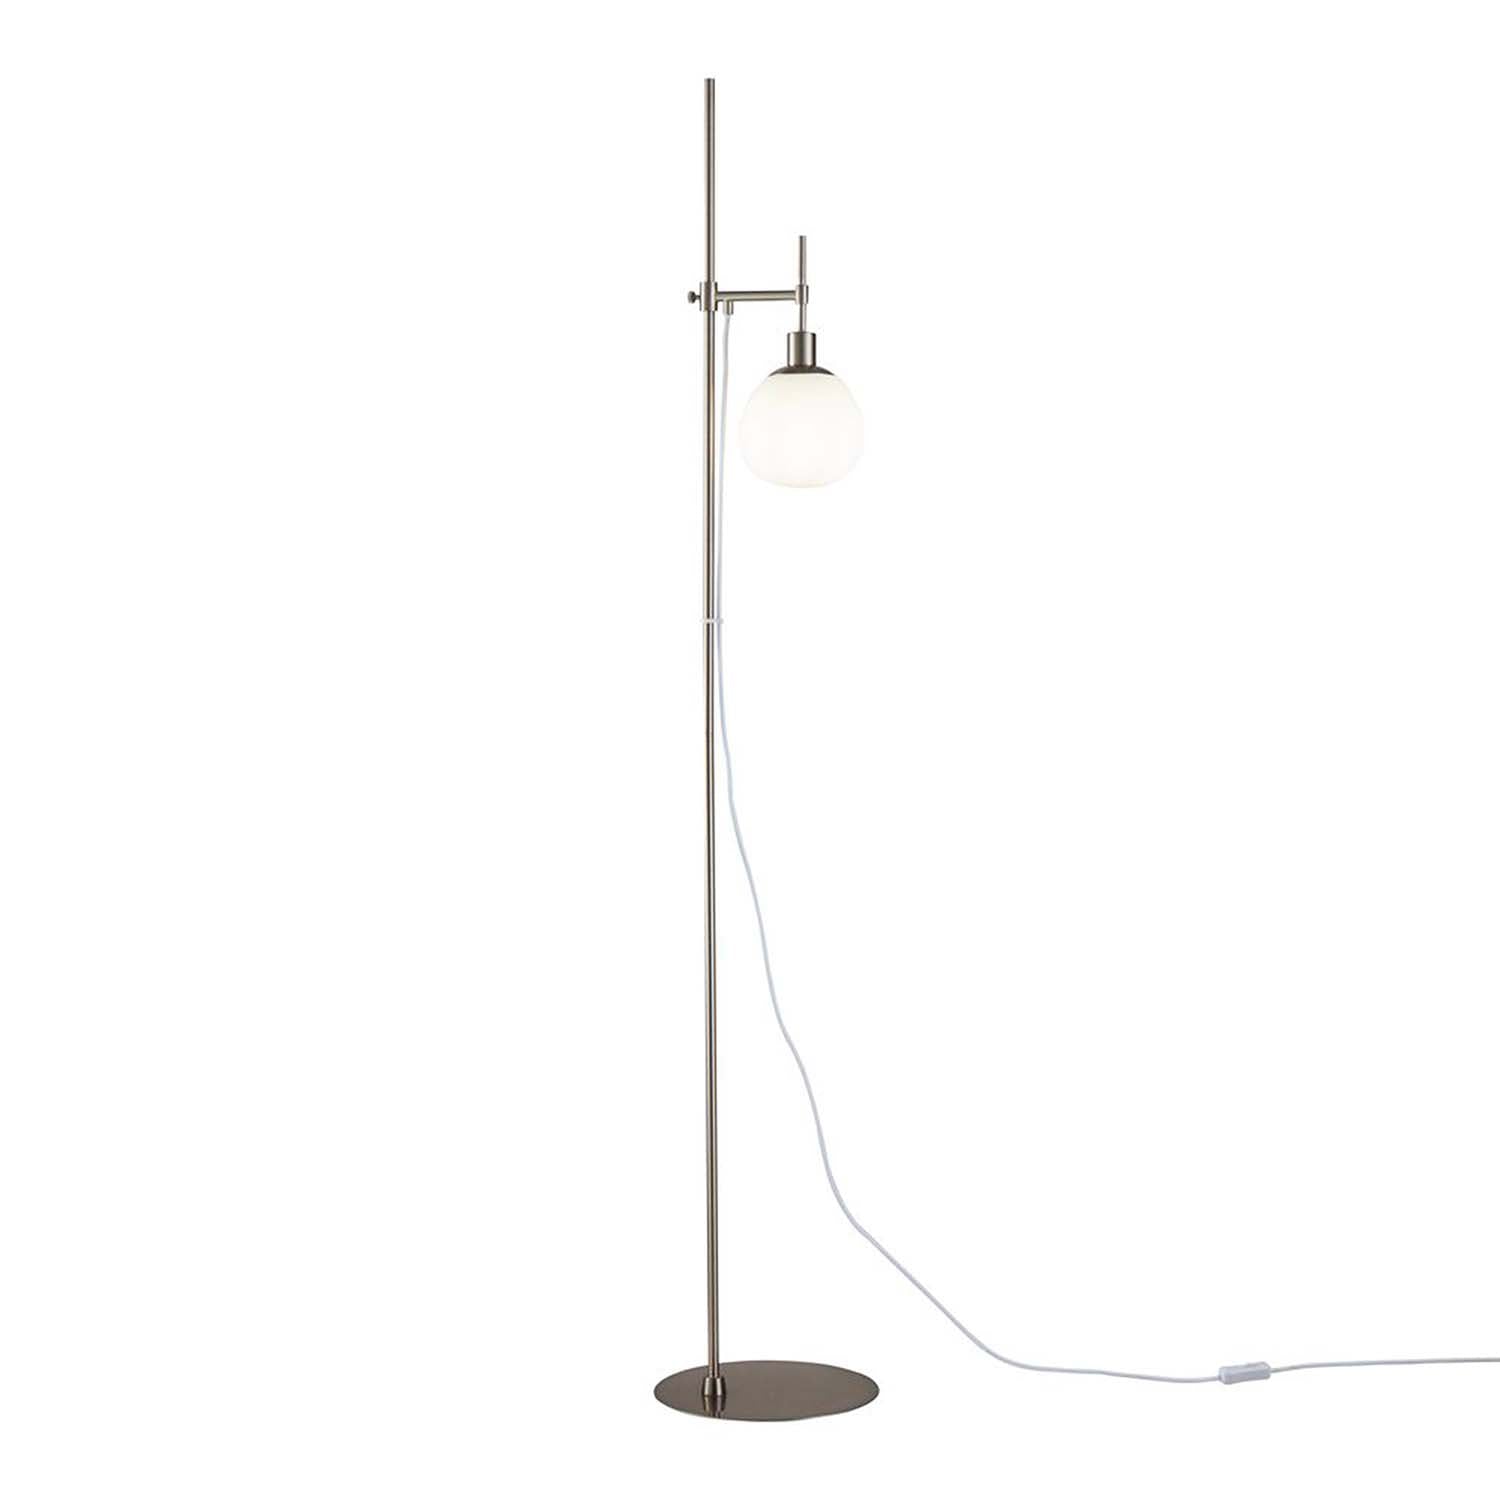 ERICH - Vintage floor lamp with glass ball